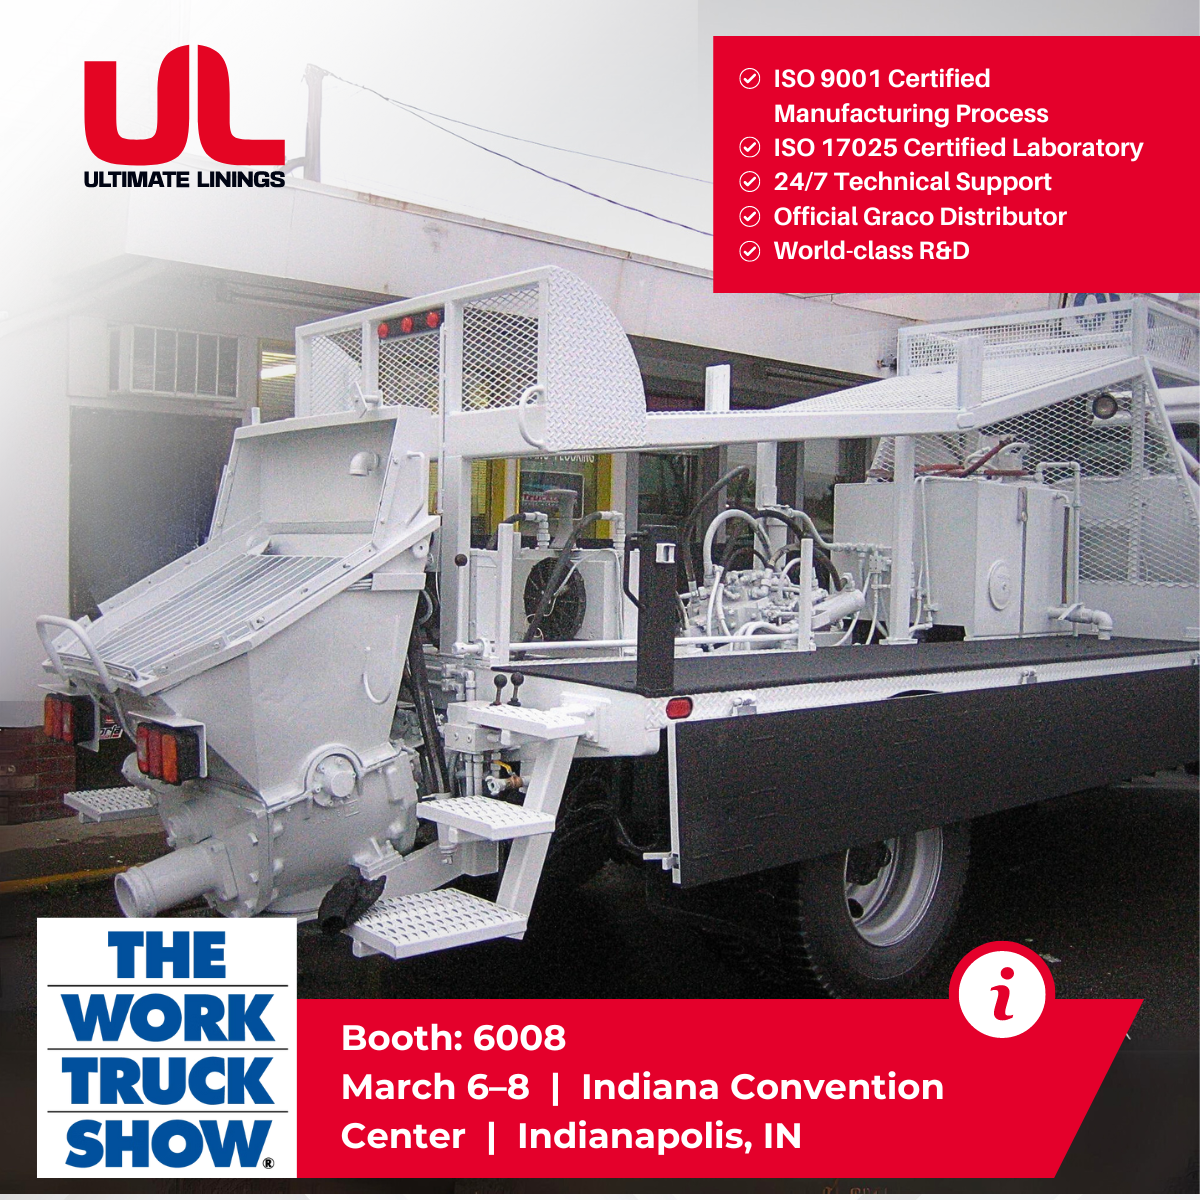 Visit us at NTEA’s Work Truck Week, Booth #6008, March 6-8, at the Indiana Convention Center, Indianapolis, IN.